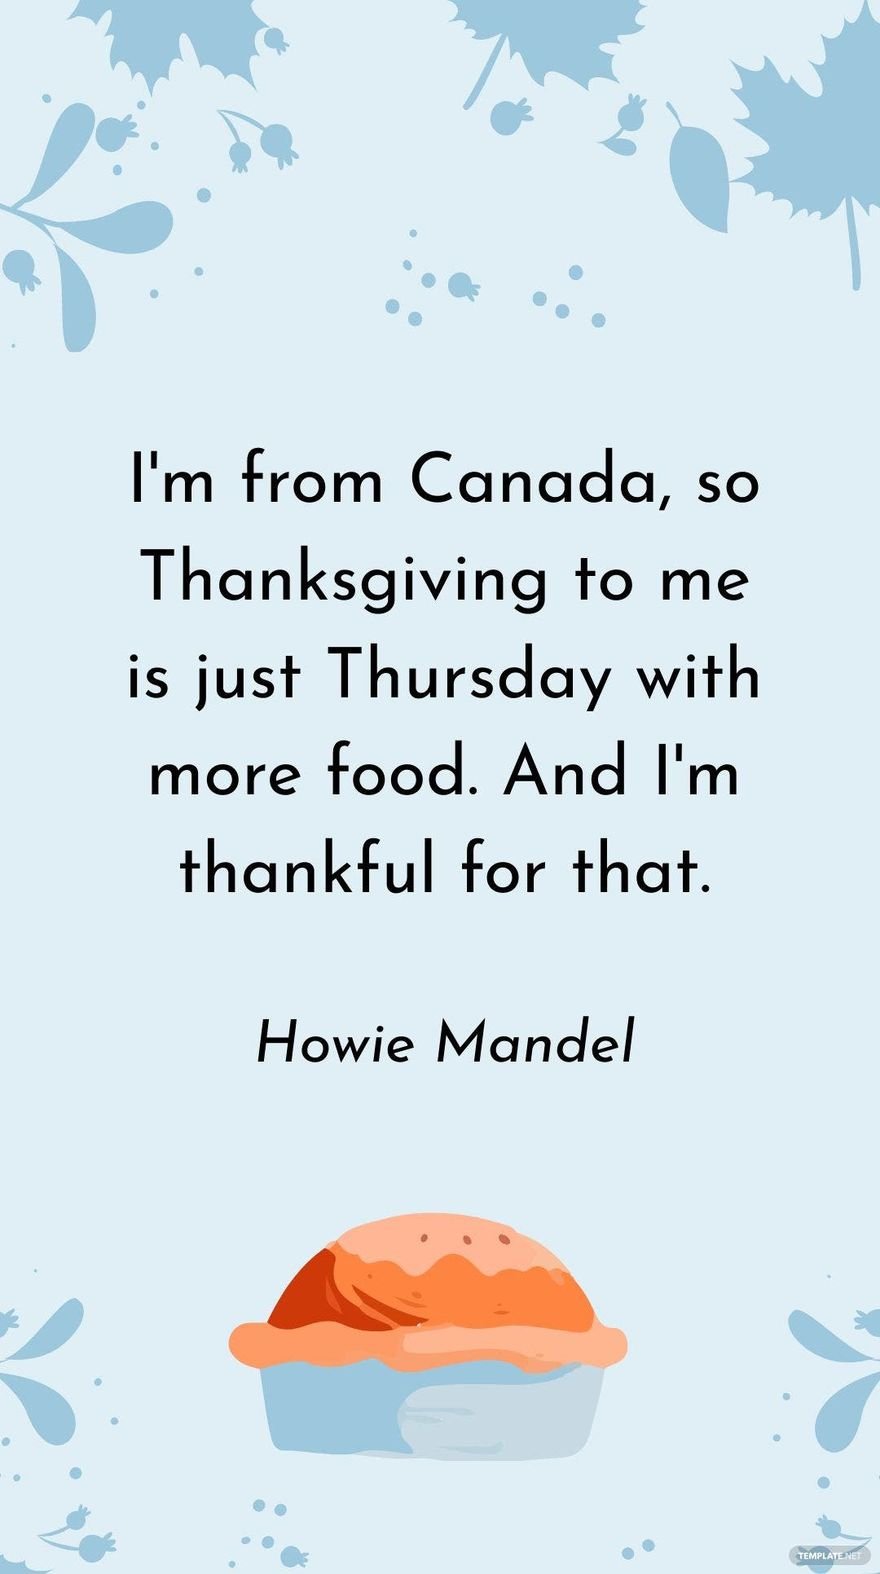 Free Howie Mandel - I'm from Canada, so Thanksgiving to me is just Thursday with more food. And I'm thankful for that. in JPG